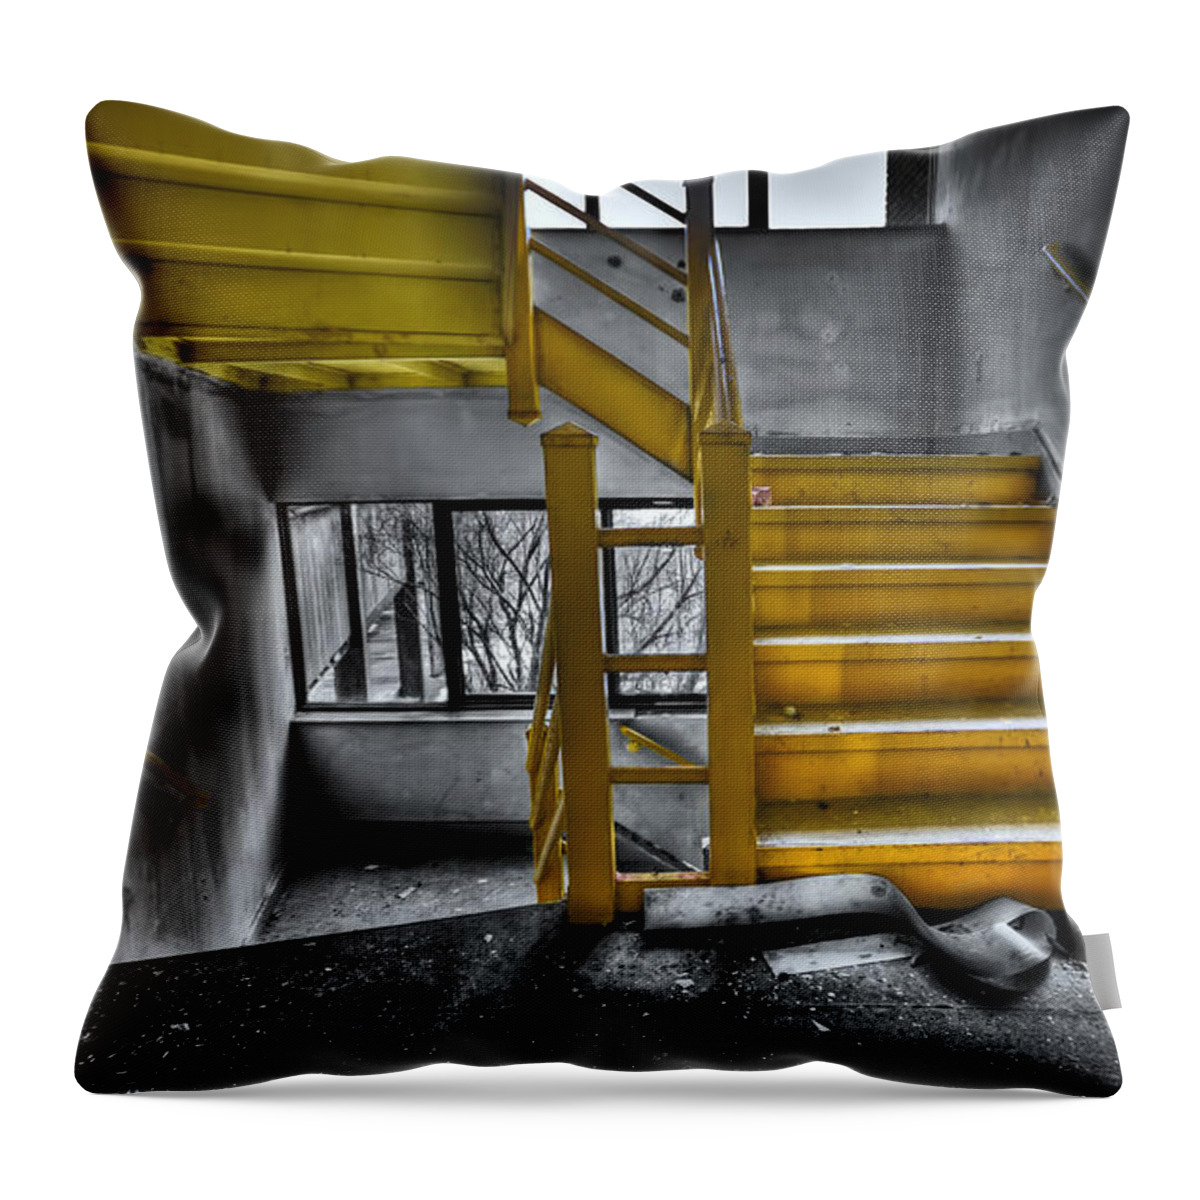 Stair Throw Pillow featuring the photograph To The Higher Ground by Evelina Kremsdorf